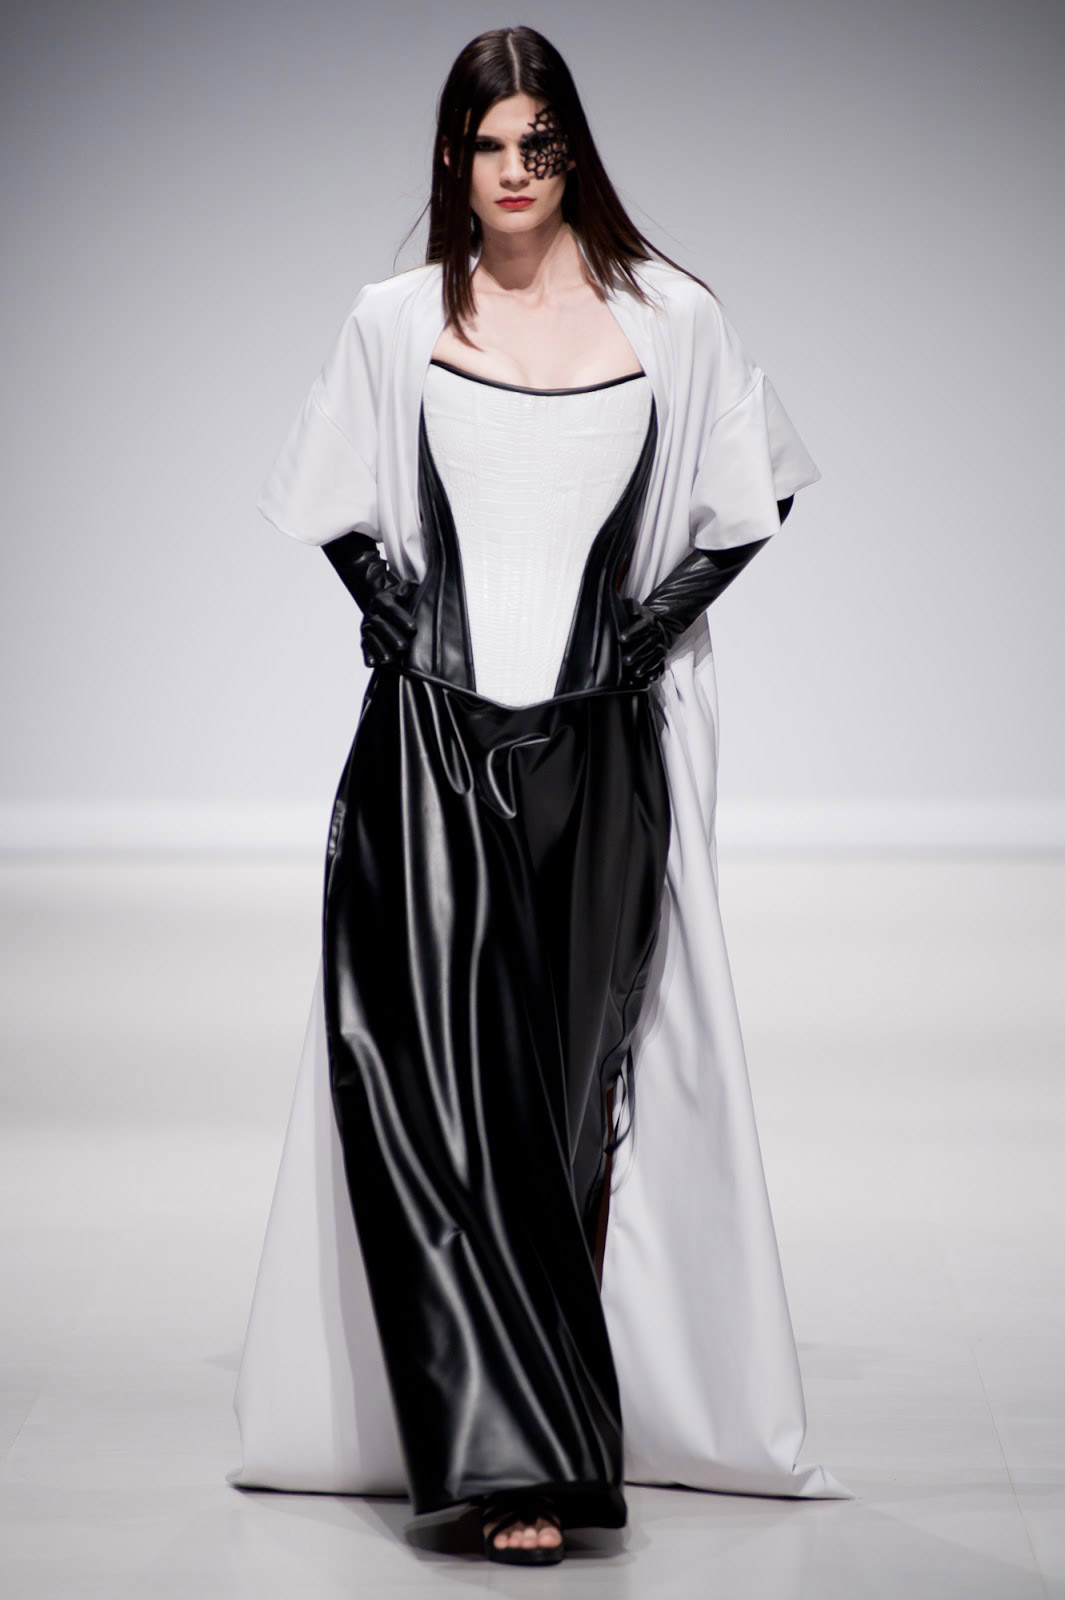 Toronto's Starkers Corsetry shows sci-fi inspired line at FAT 2014 - Toronto